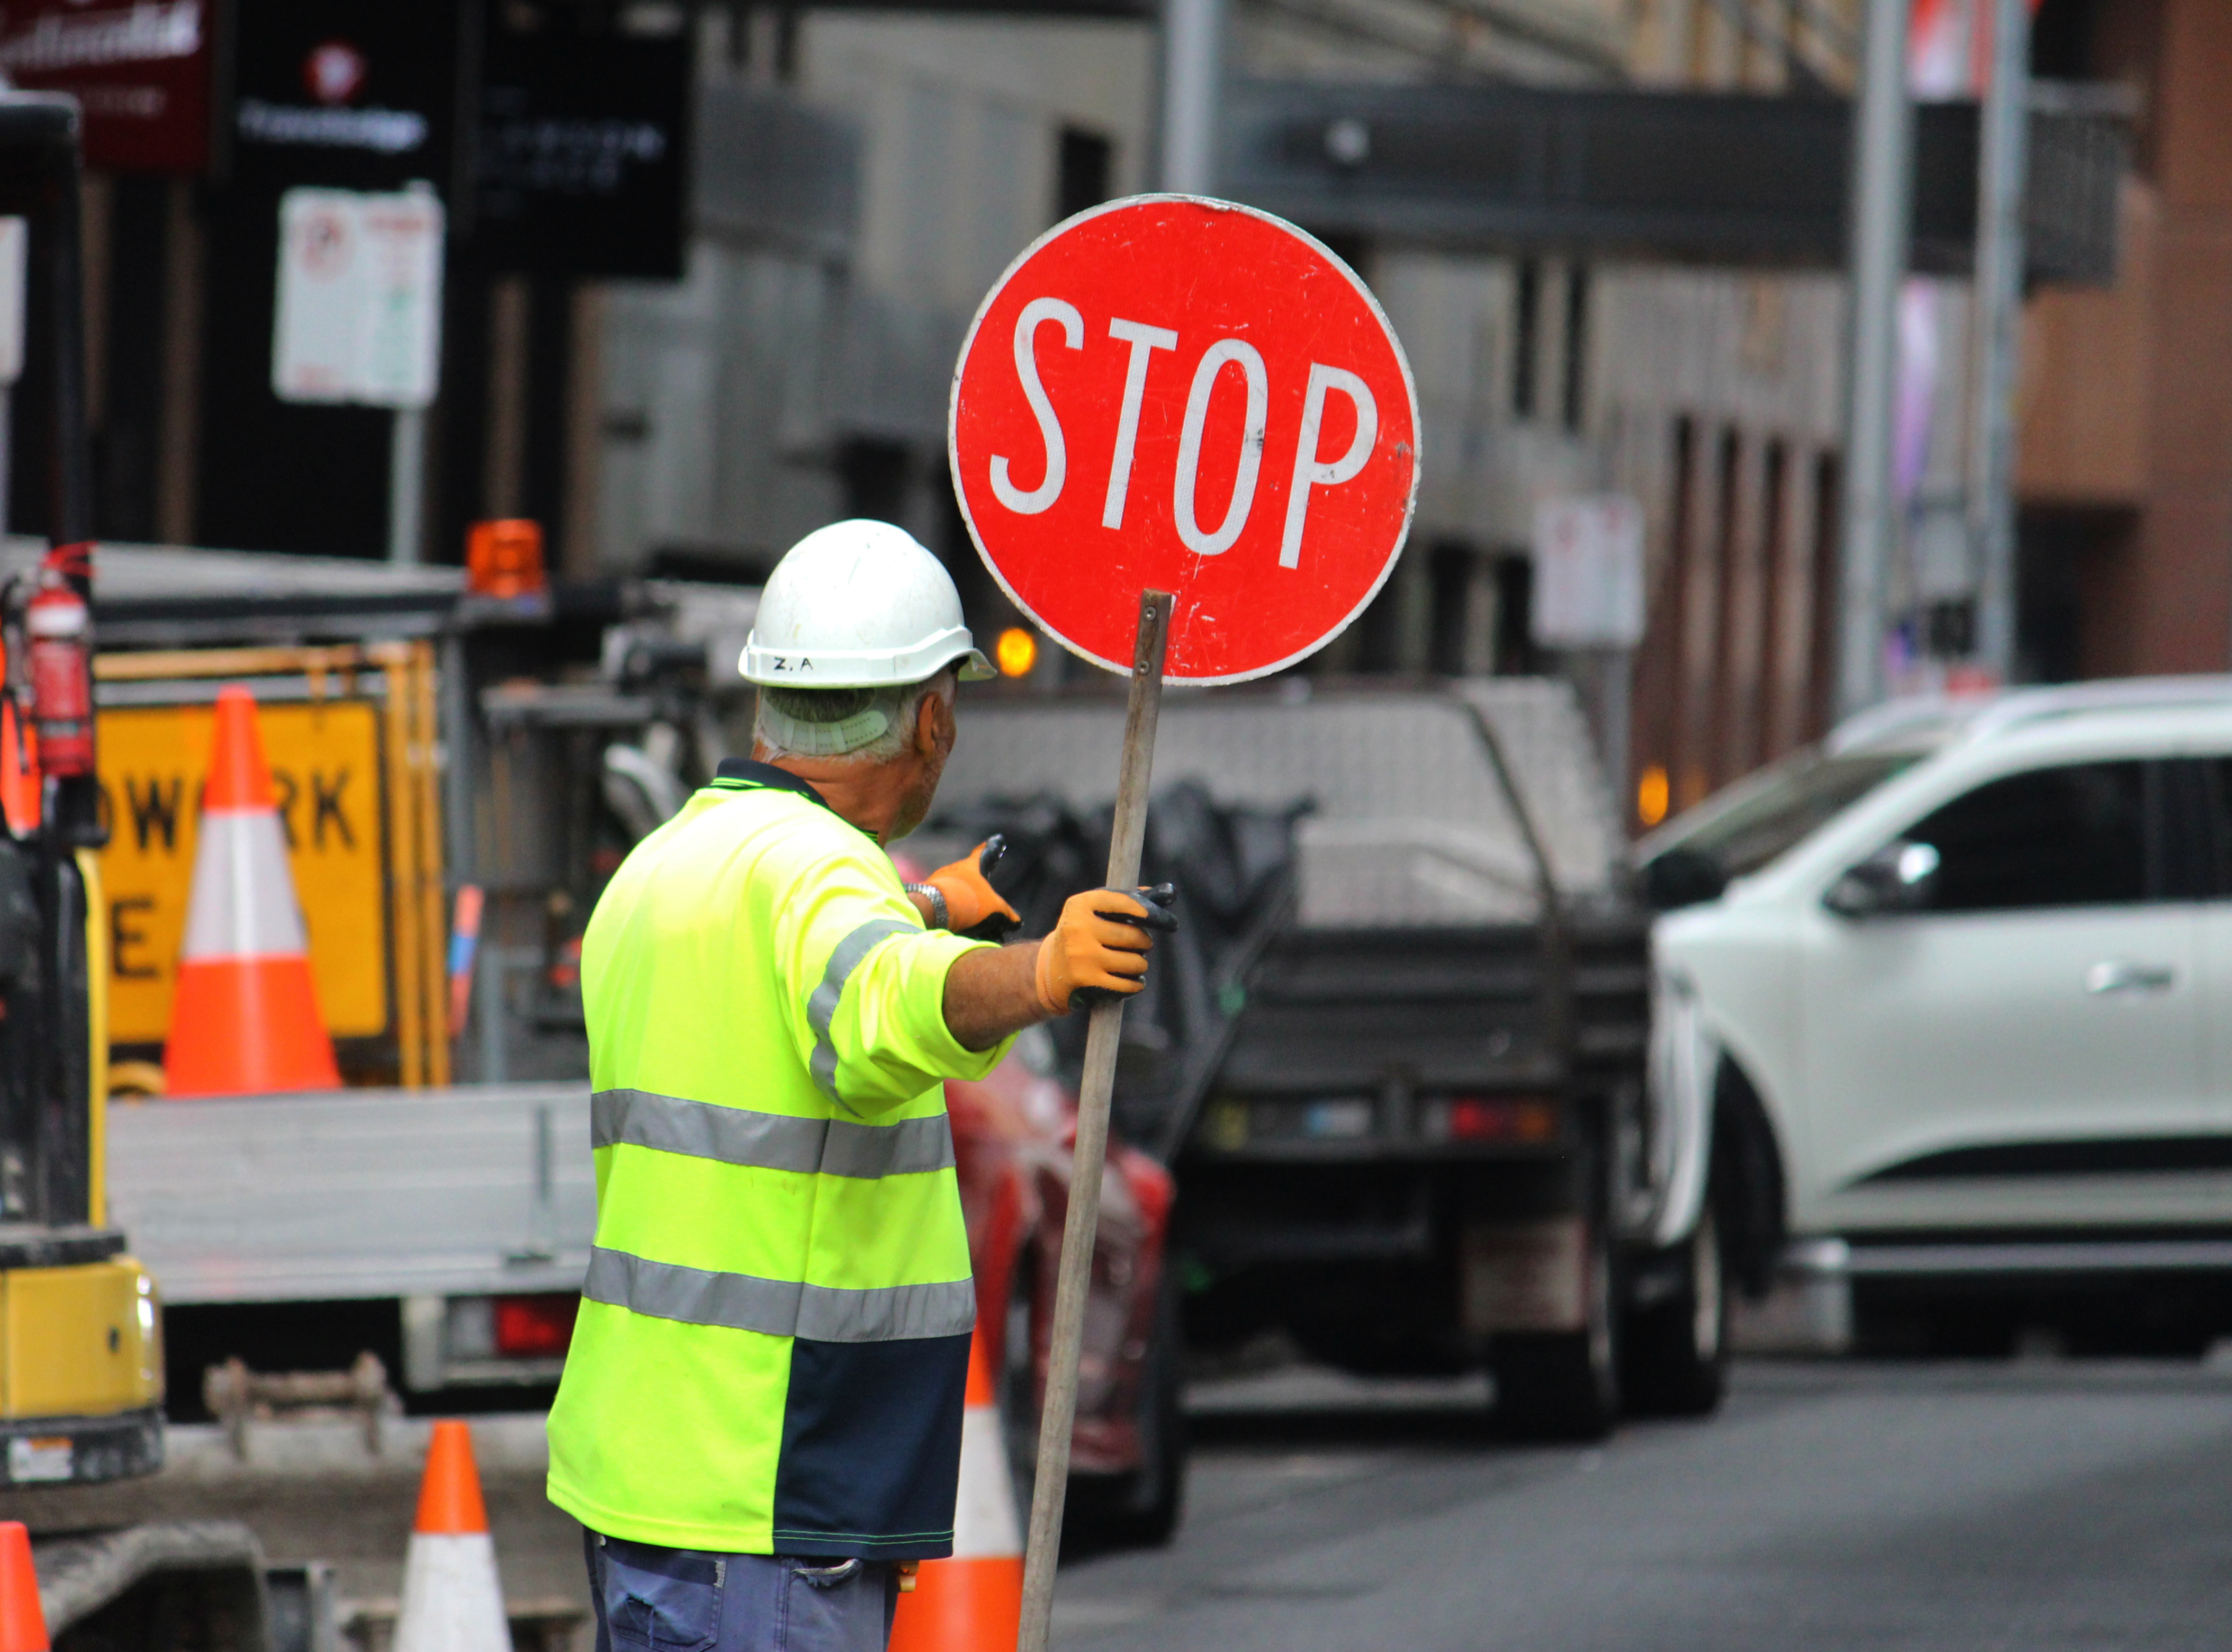 Male construction road worker holding a stop sign and directing